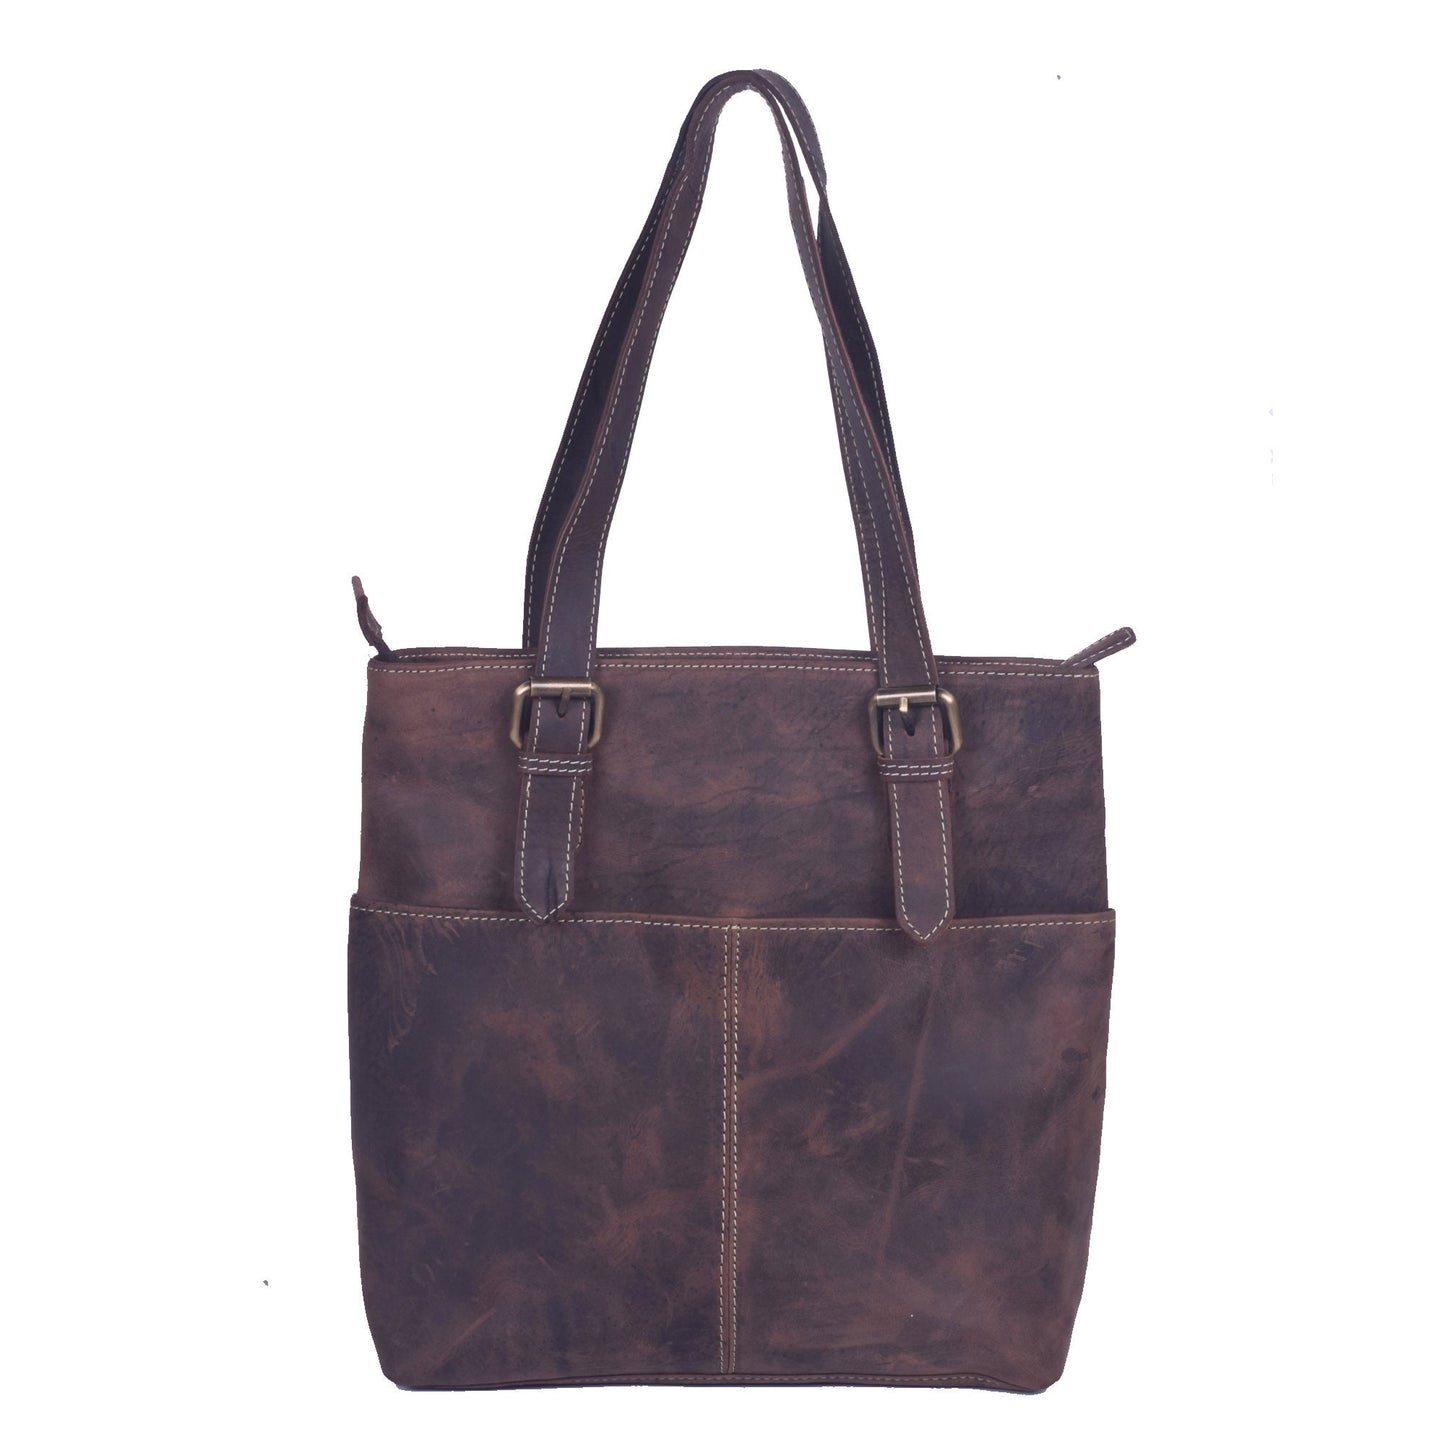 Dark Brown Distress Hunter Leather Tote Bag for Women , Office Tote Bag Everyday Leather Tote Shoulder Bag with Pockets Daily Use Tote Purse